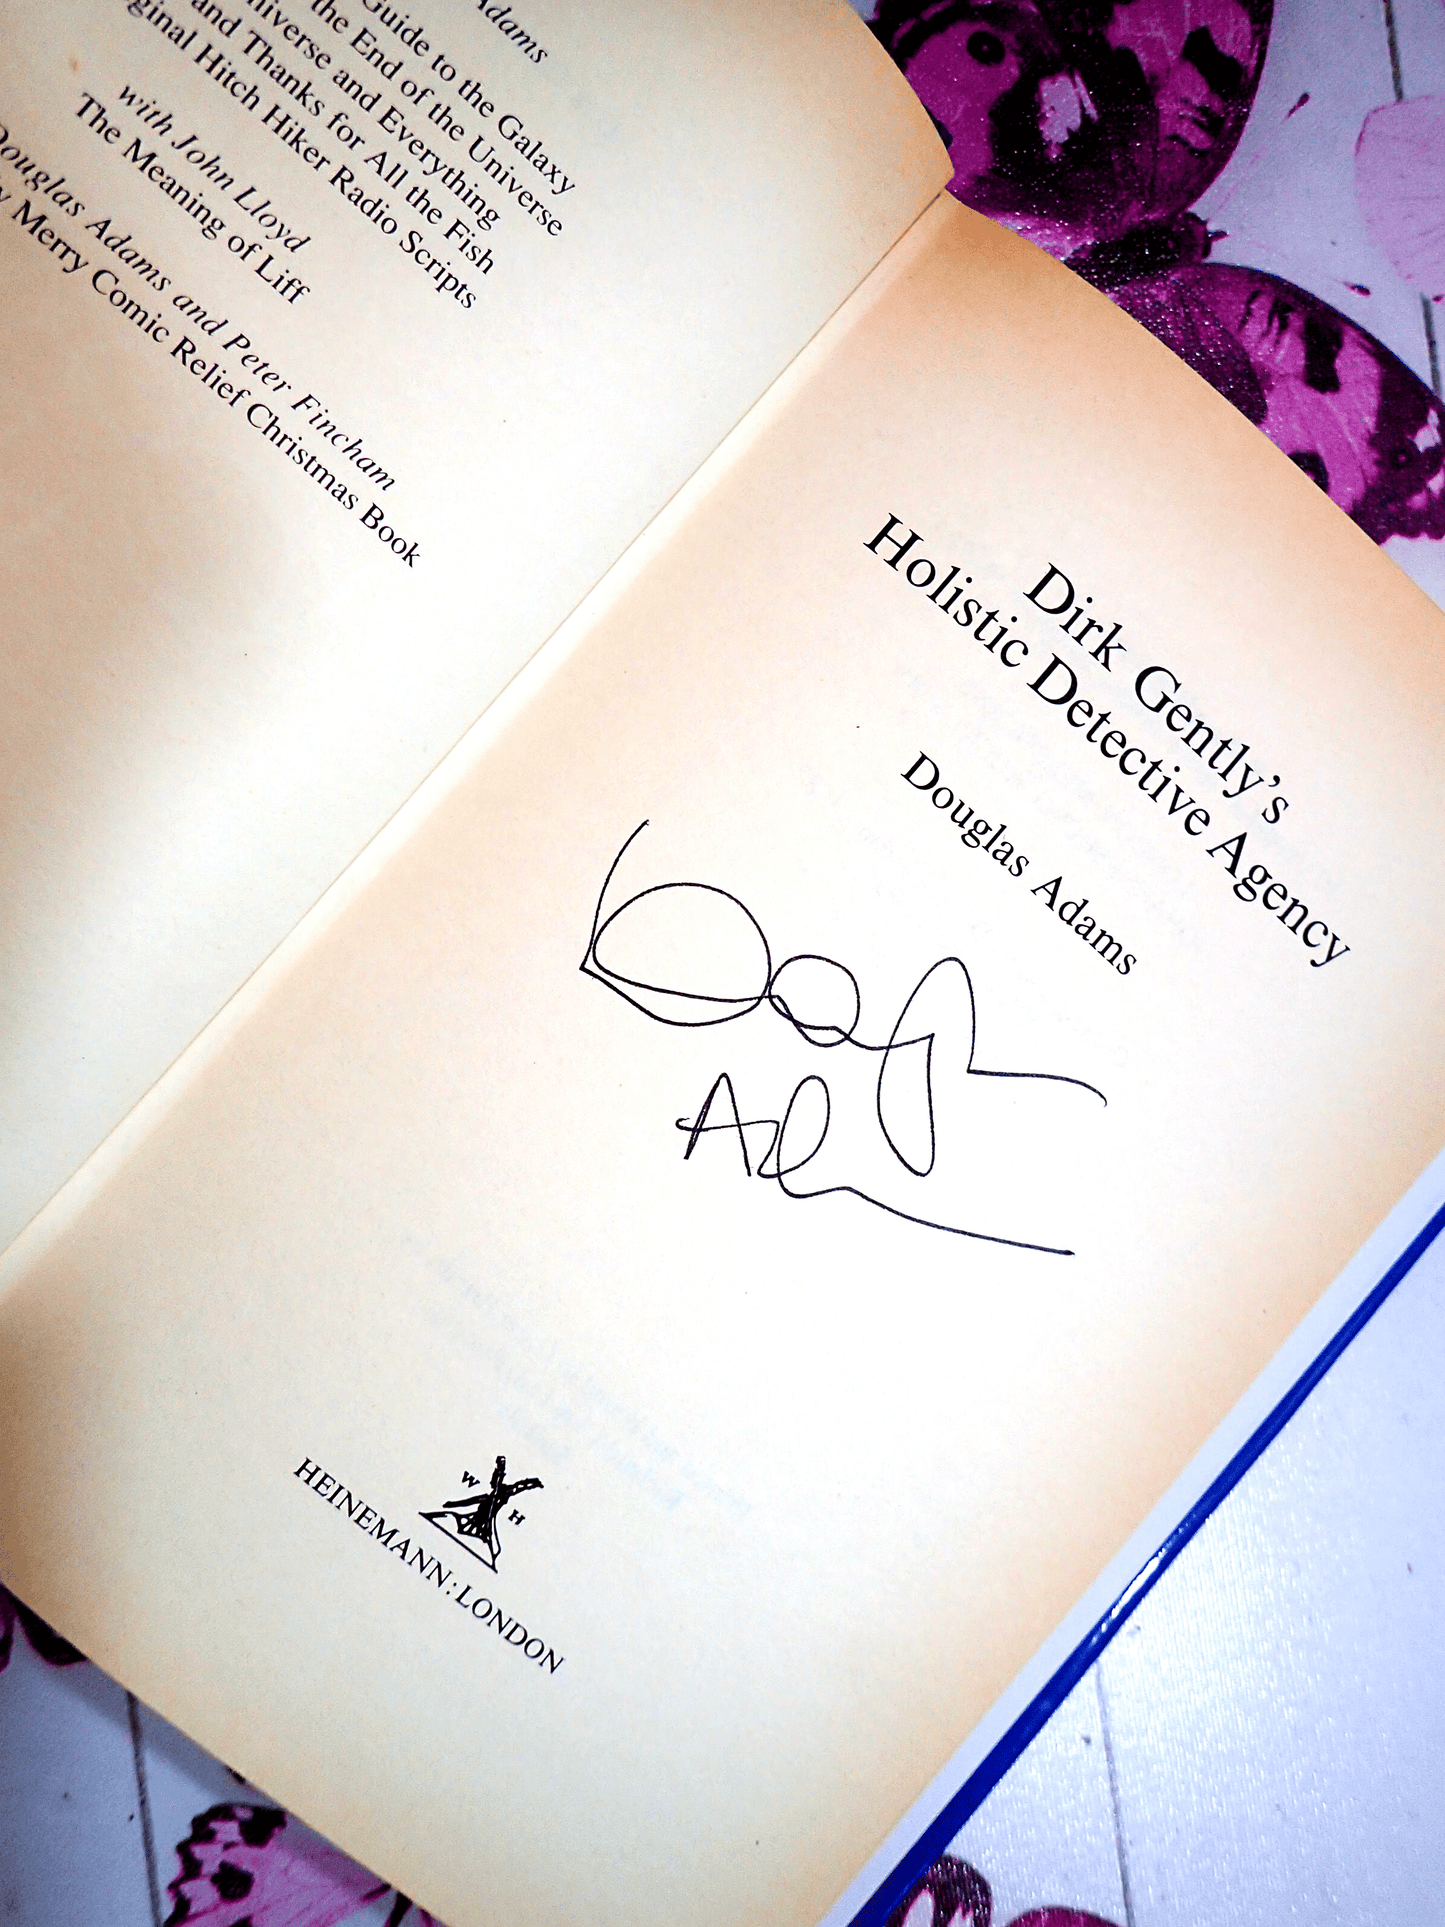 Signature of Douglas Adams in Dirk Gently's Holistic Detective Agency Signed First Edition 1st Impression Scarce Sci Fi Classic Hitch Hikers Guide Author